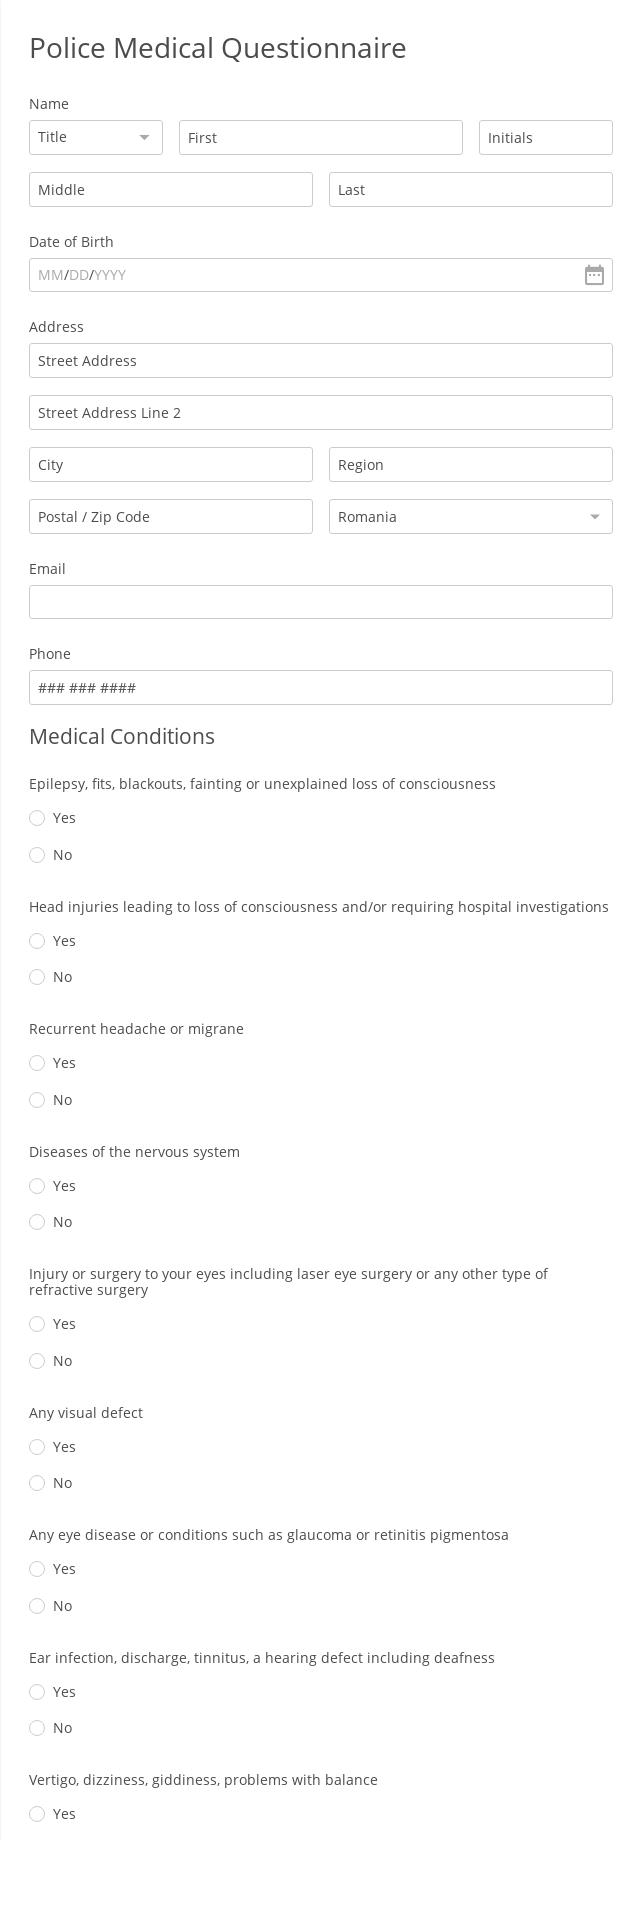 Police Medical Questionnaire